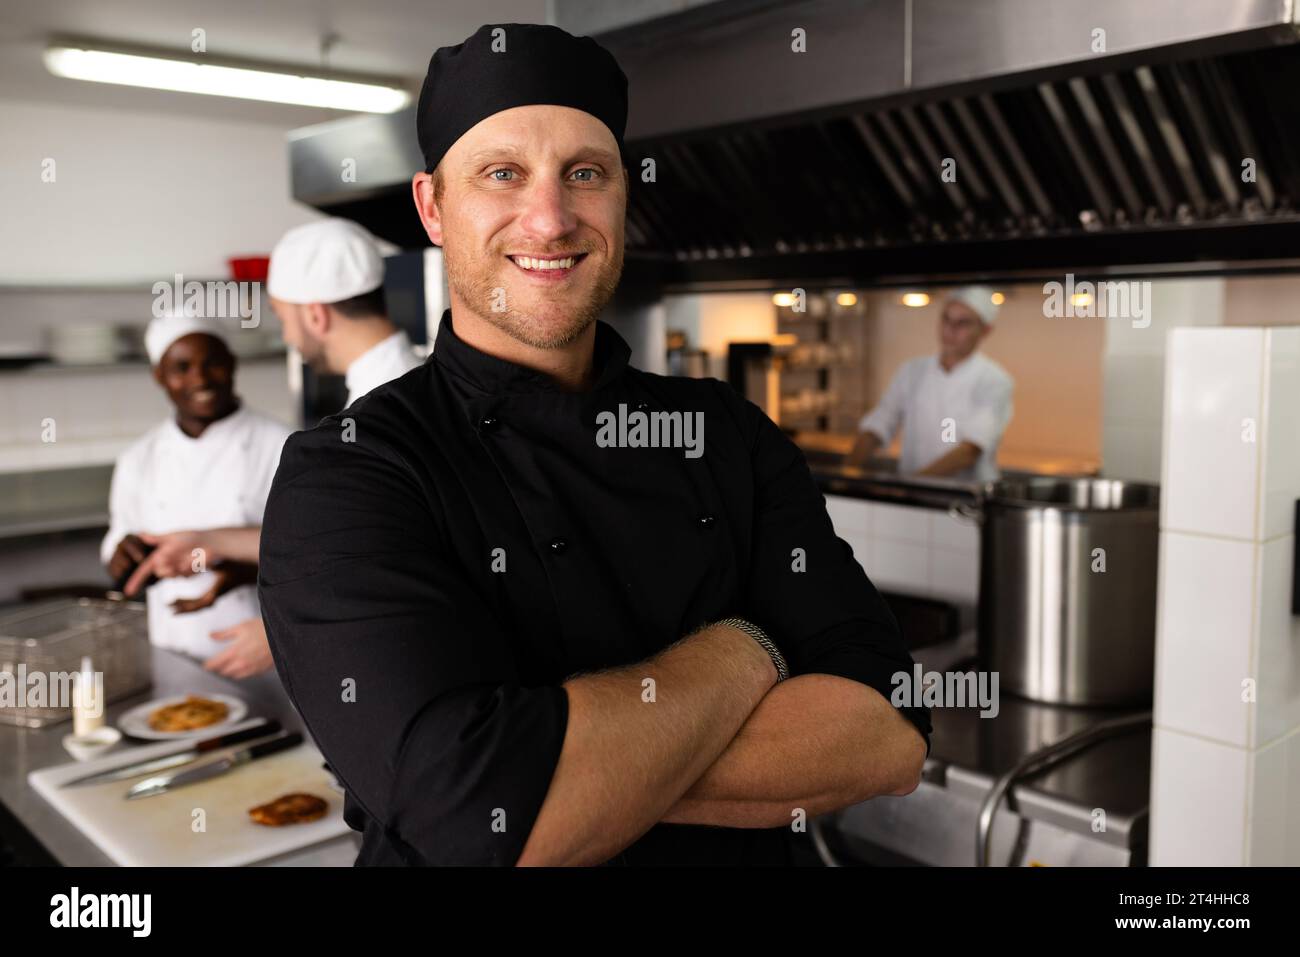 Diverse head chef with arms crossed standing against male students cooking in background Stock Photo